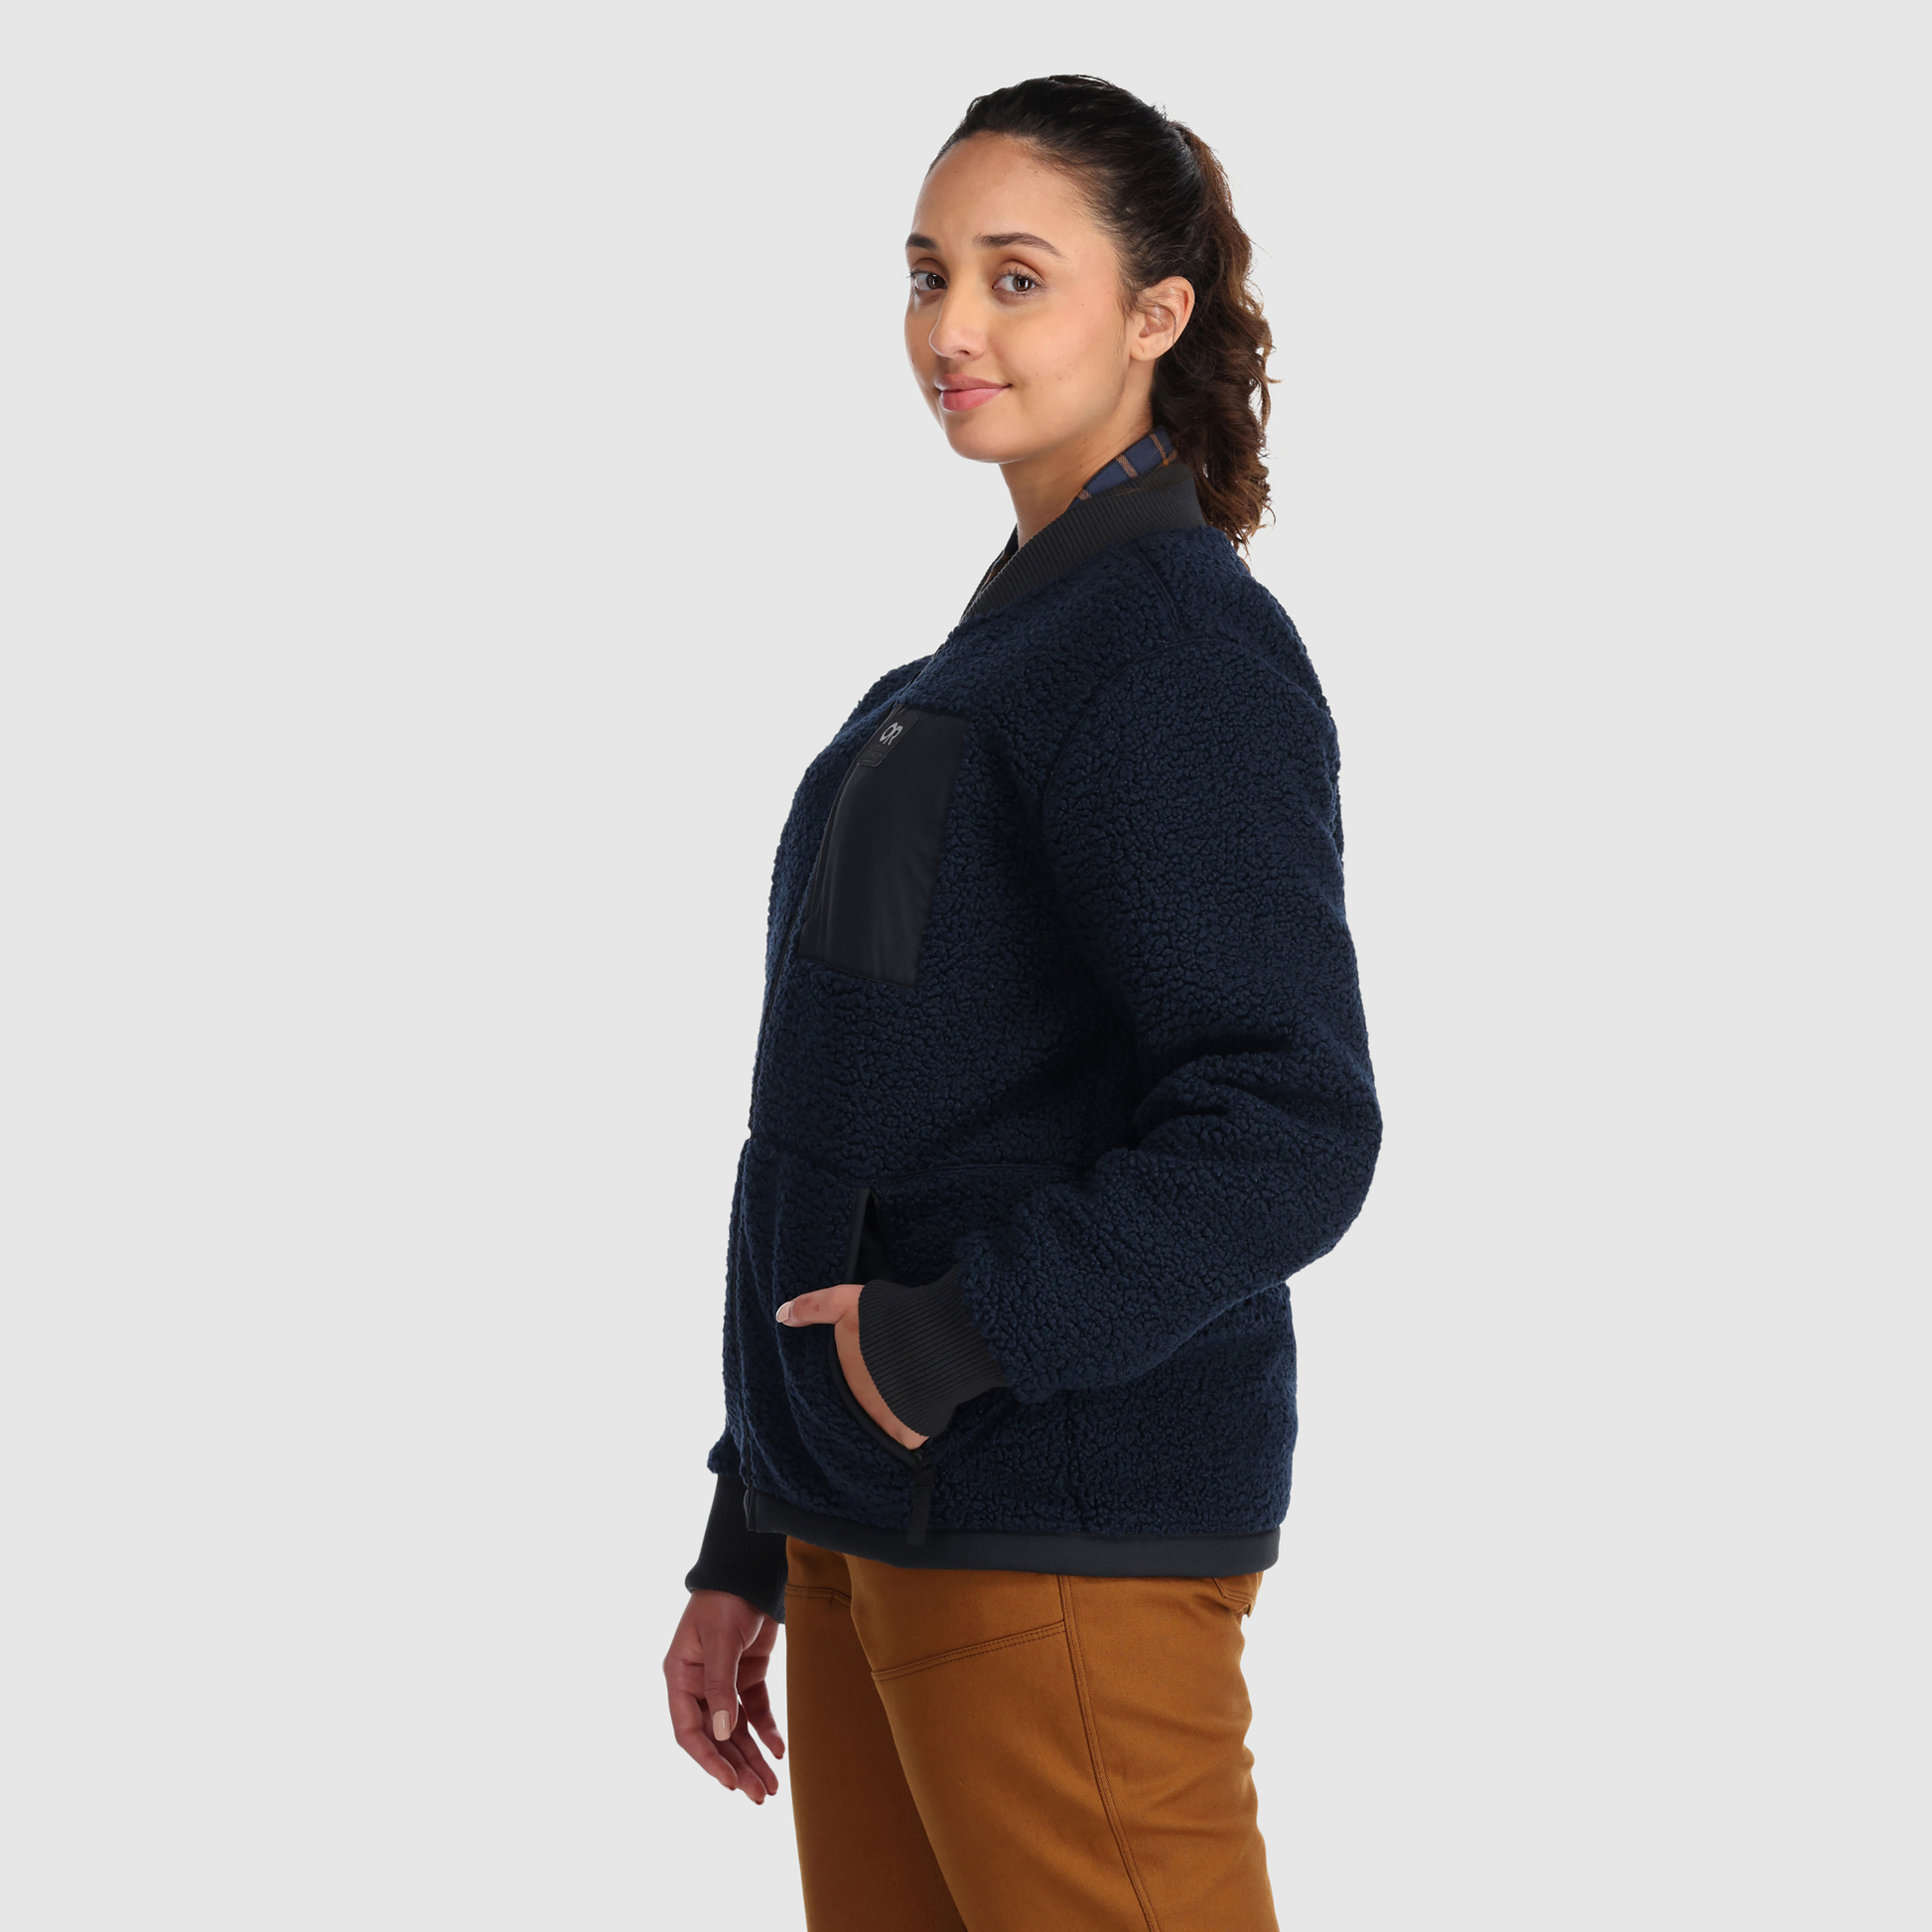 Zoologisk have forvisning Site line Women's Juneau Sherpa Fleece Jacket | Outdoor Research